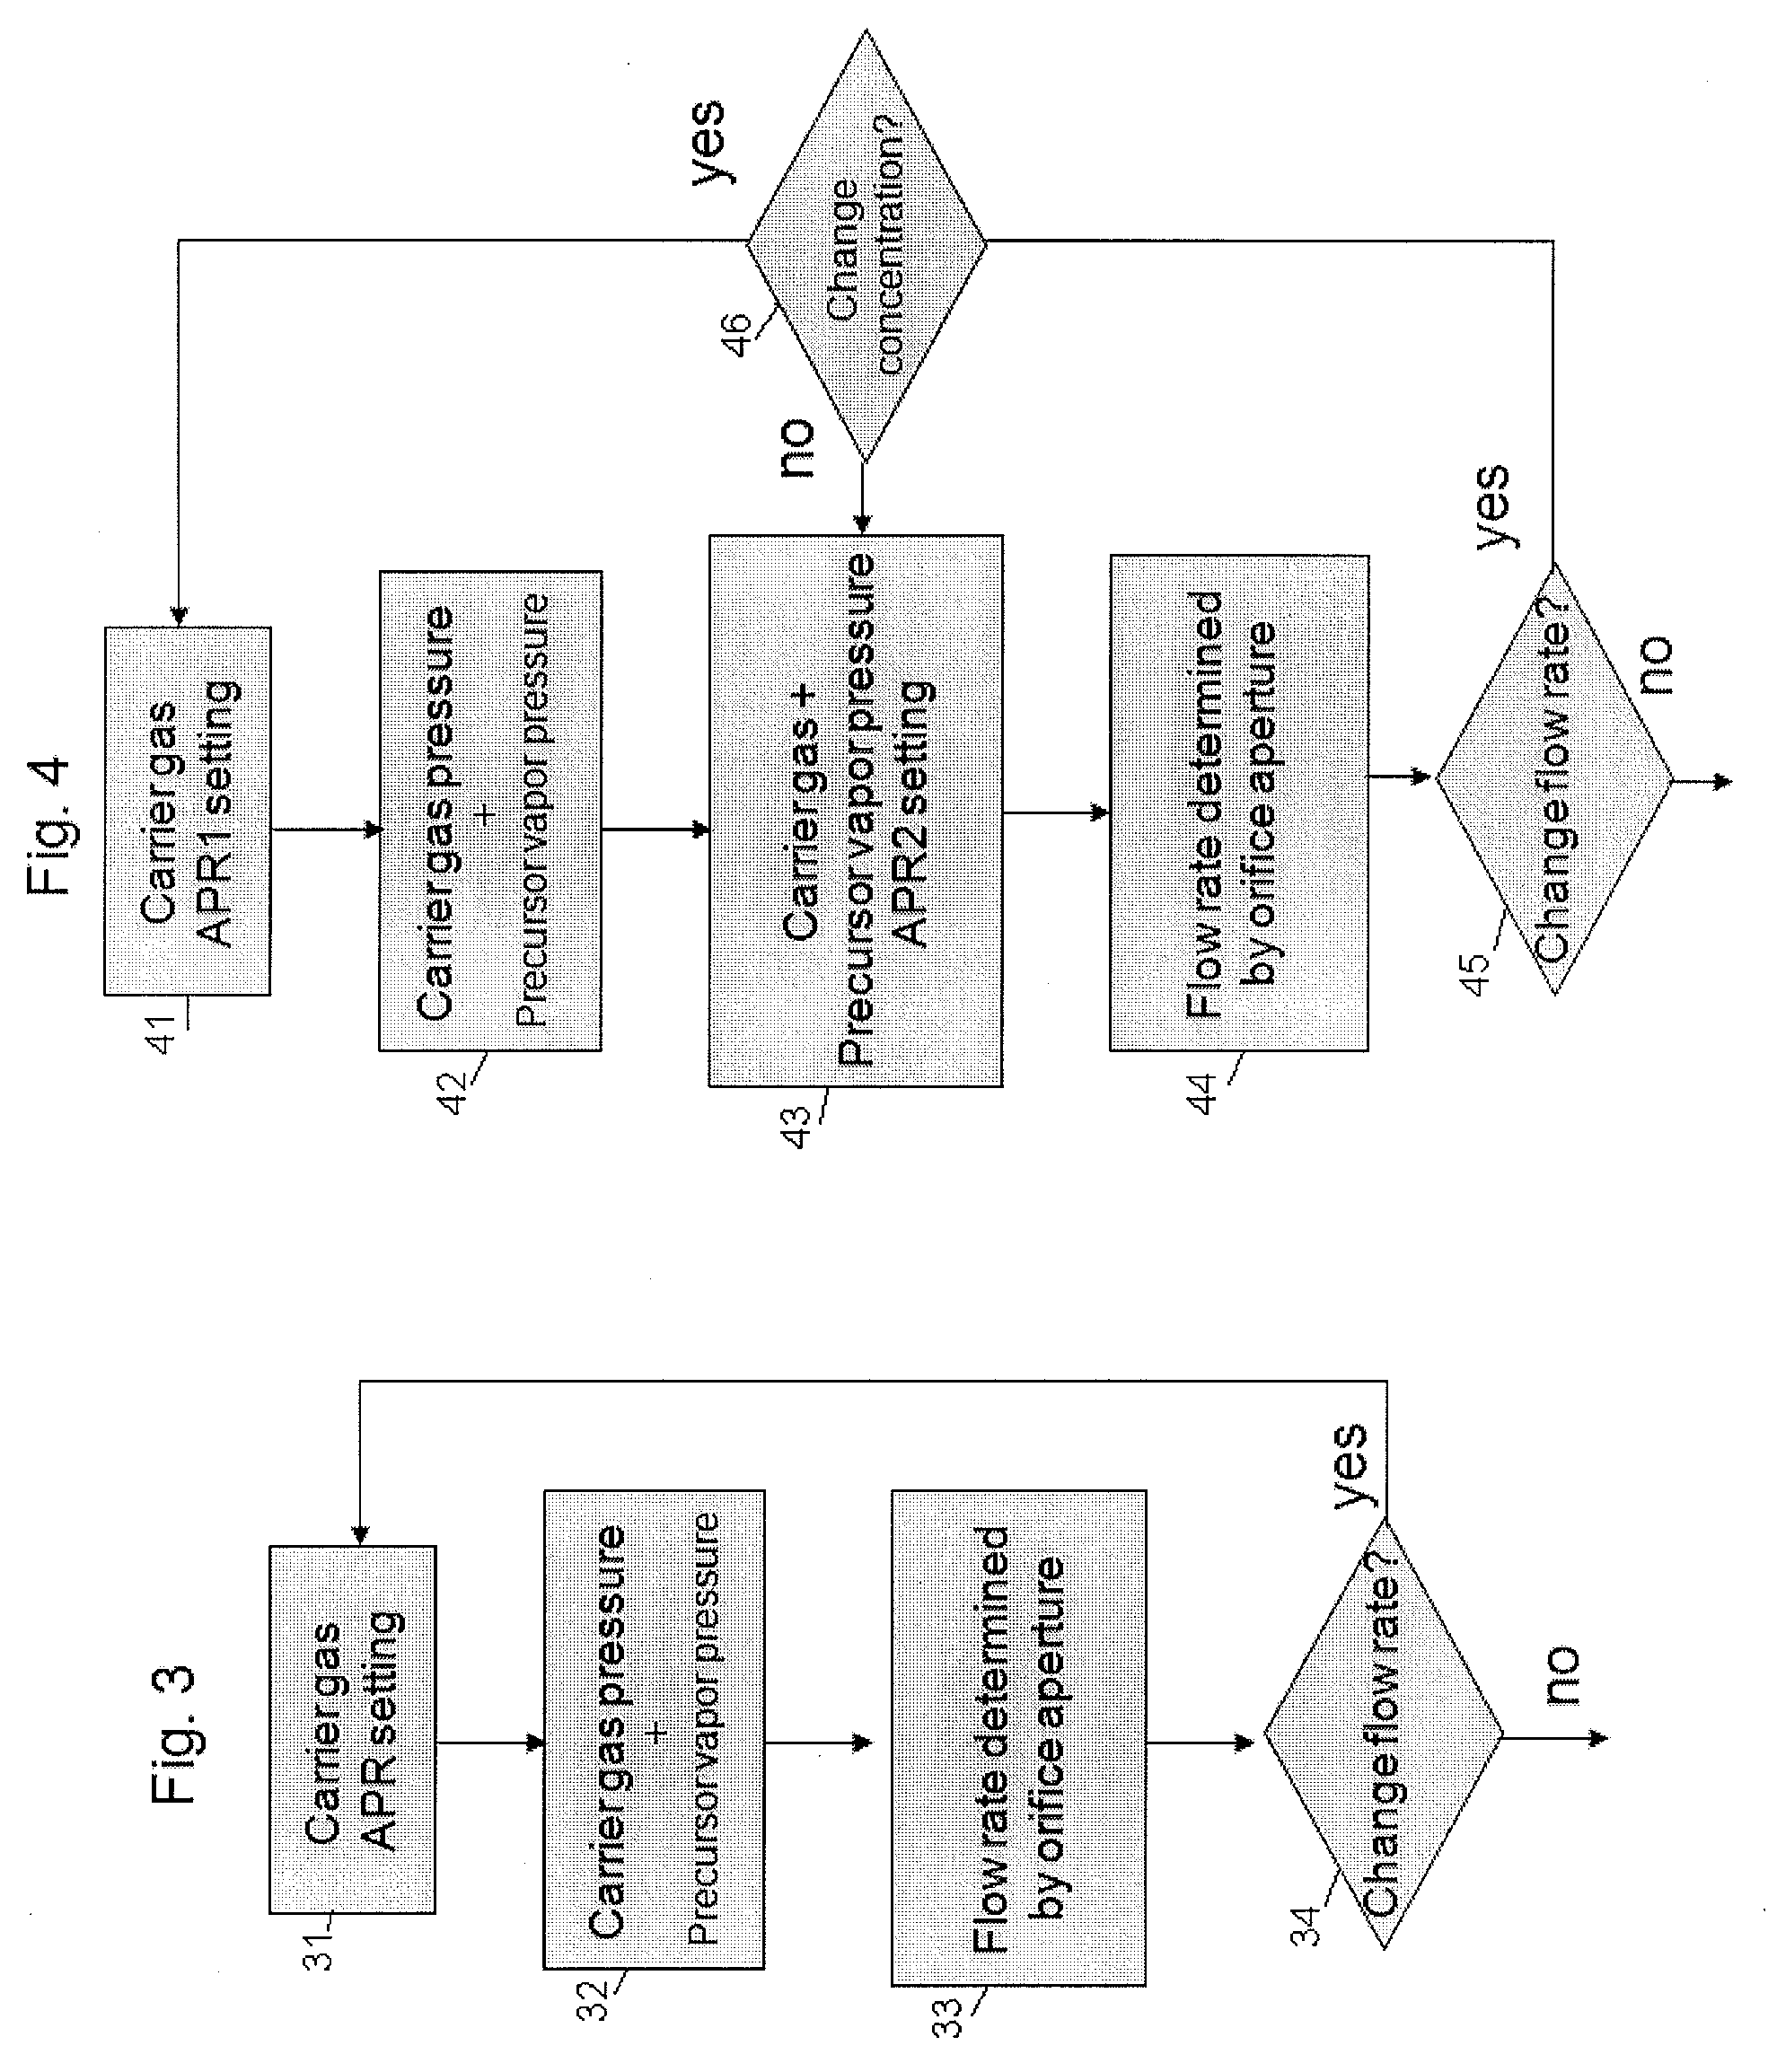 Method for controlling flow and concentration of liquid precursor